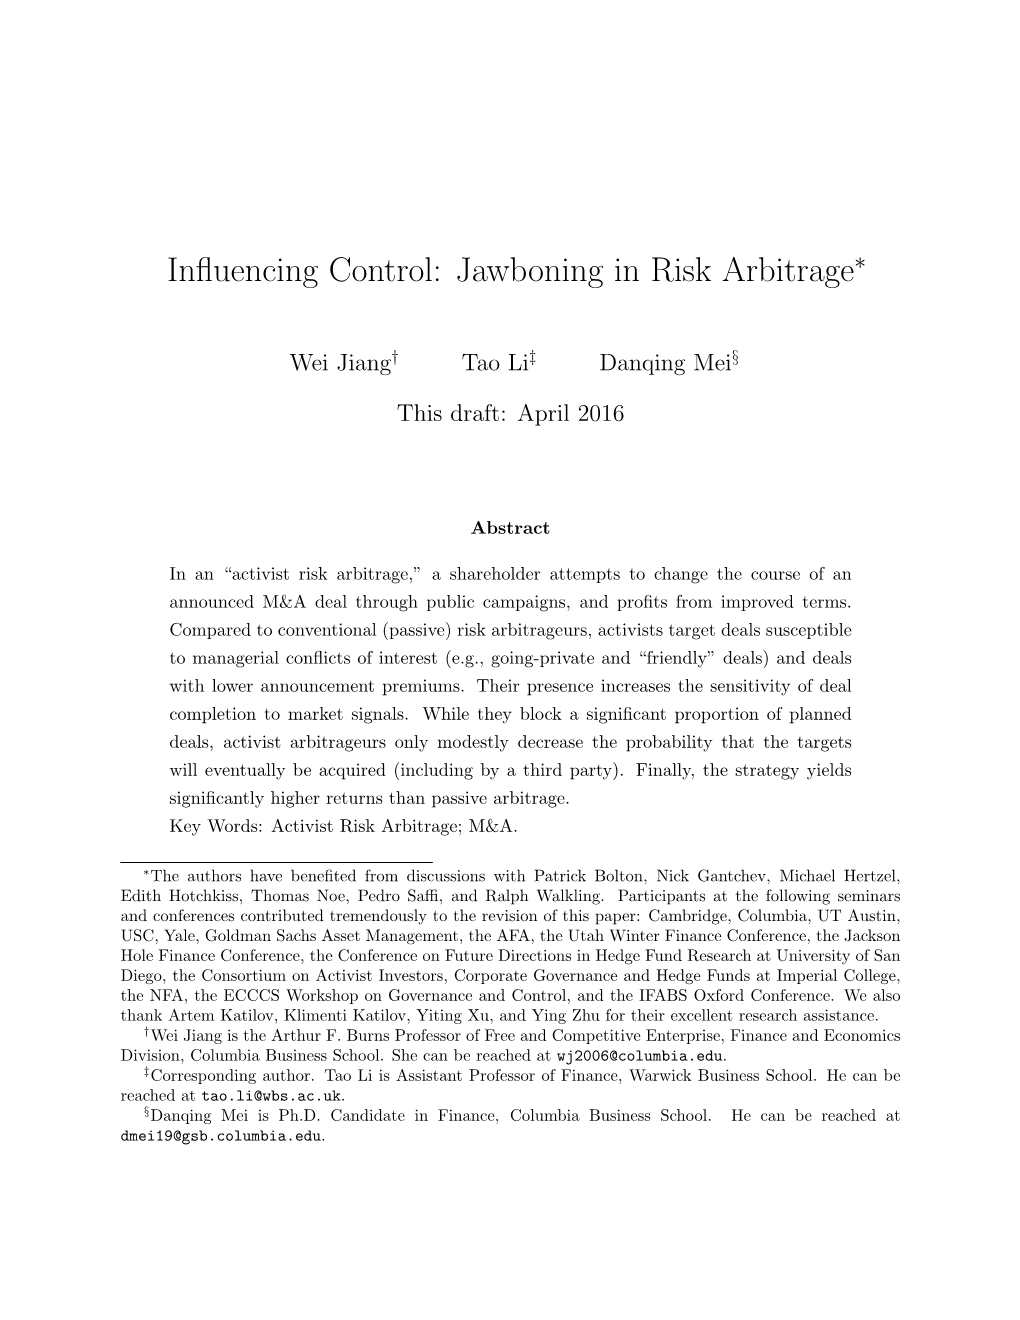 Influencing Control: Jawboning in Risk Arbitrage